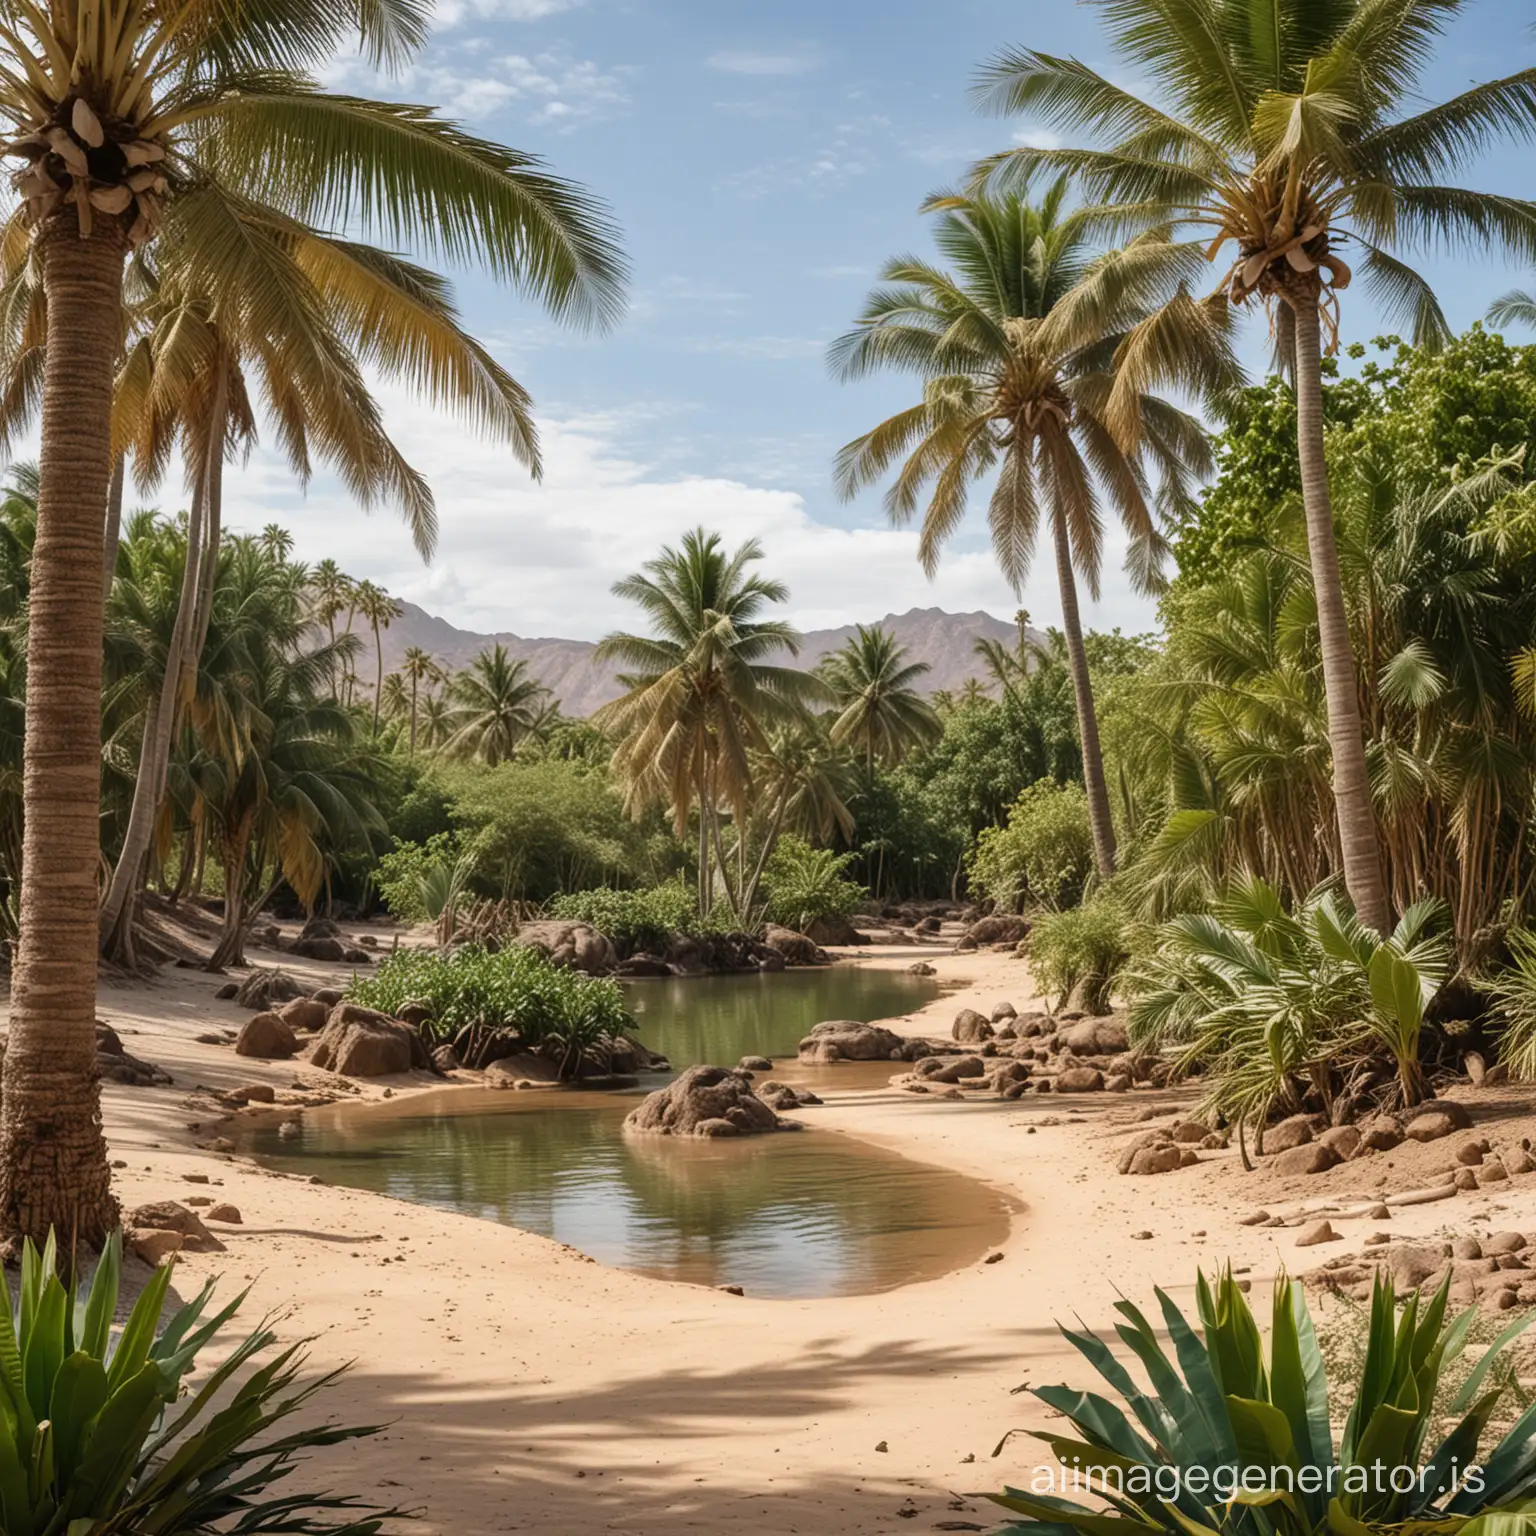 Tropical-Oasis-in-Desert-with-Coconut-and-Banana-Trees